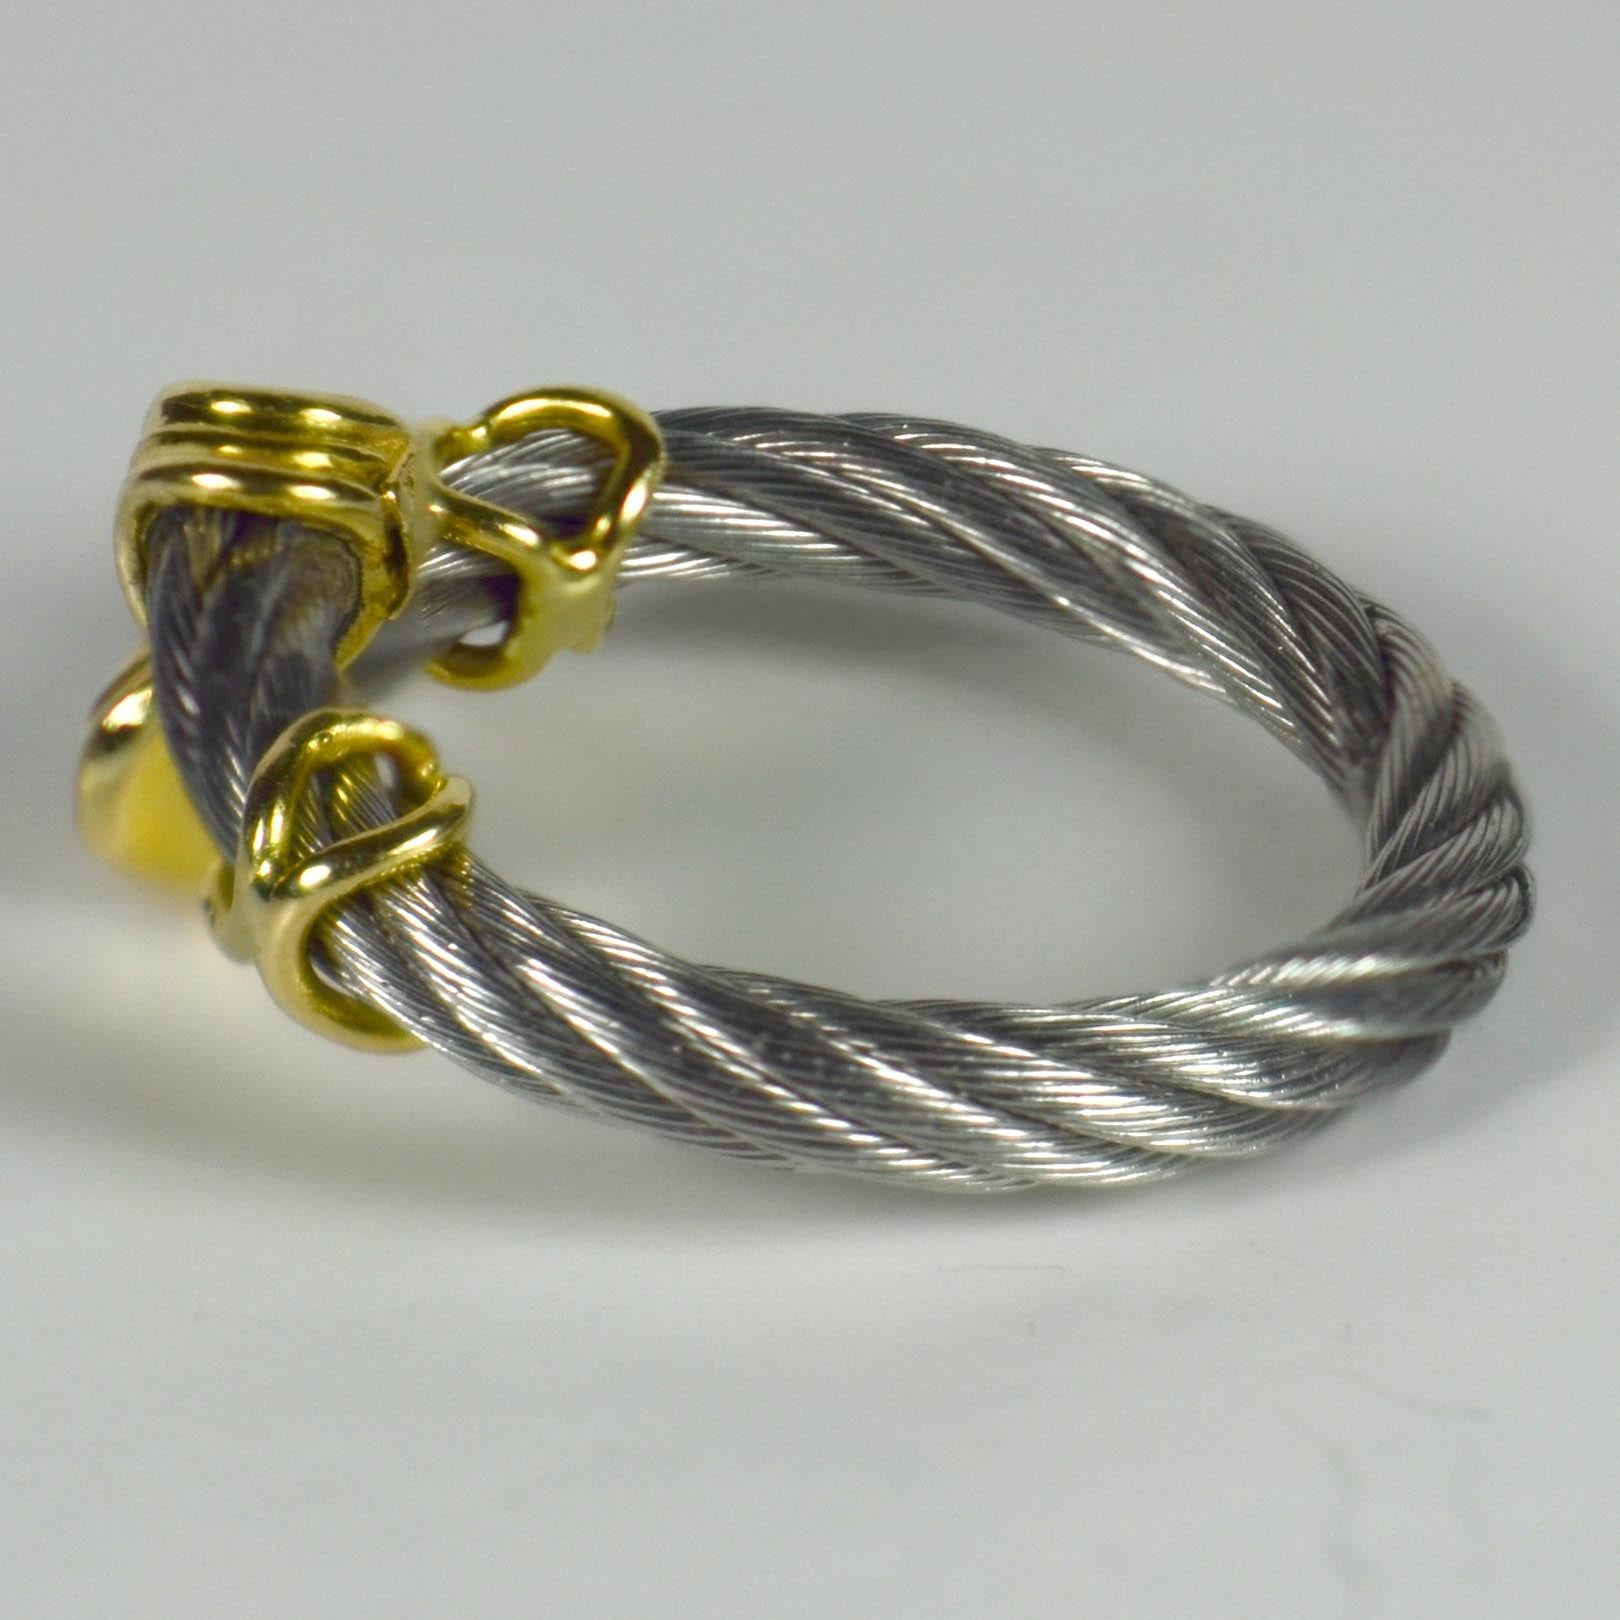 A smart ring in twisted steel cable with 18 karat yellow gold cross-shaped bands and ridged terminals.
Numbered 69503, marked 750 for 18 karat gold.
Ring size 6 (US), L.5 (UK.
